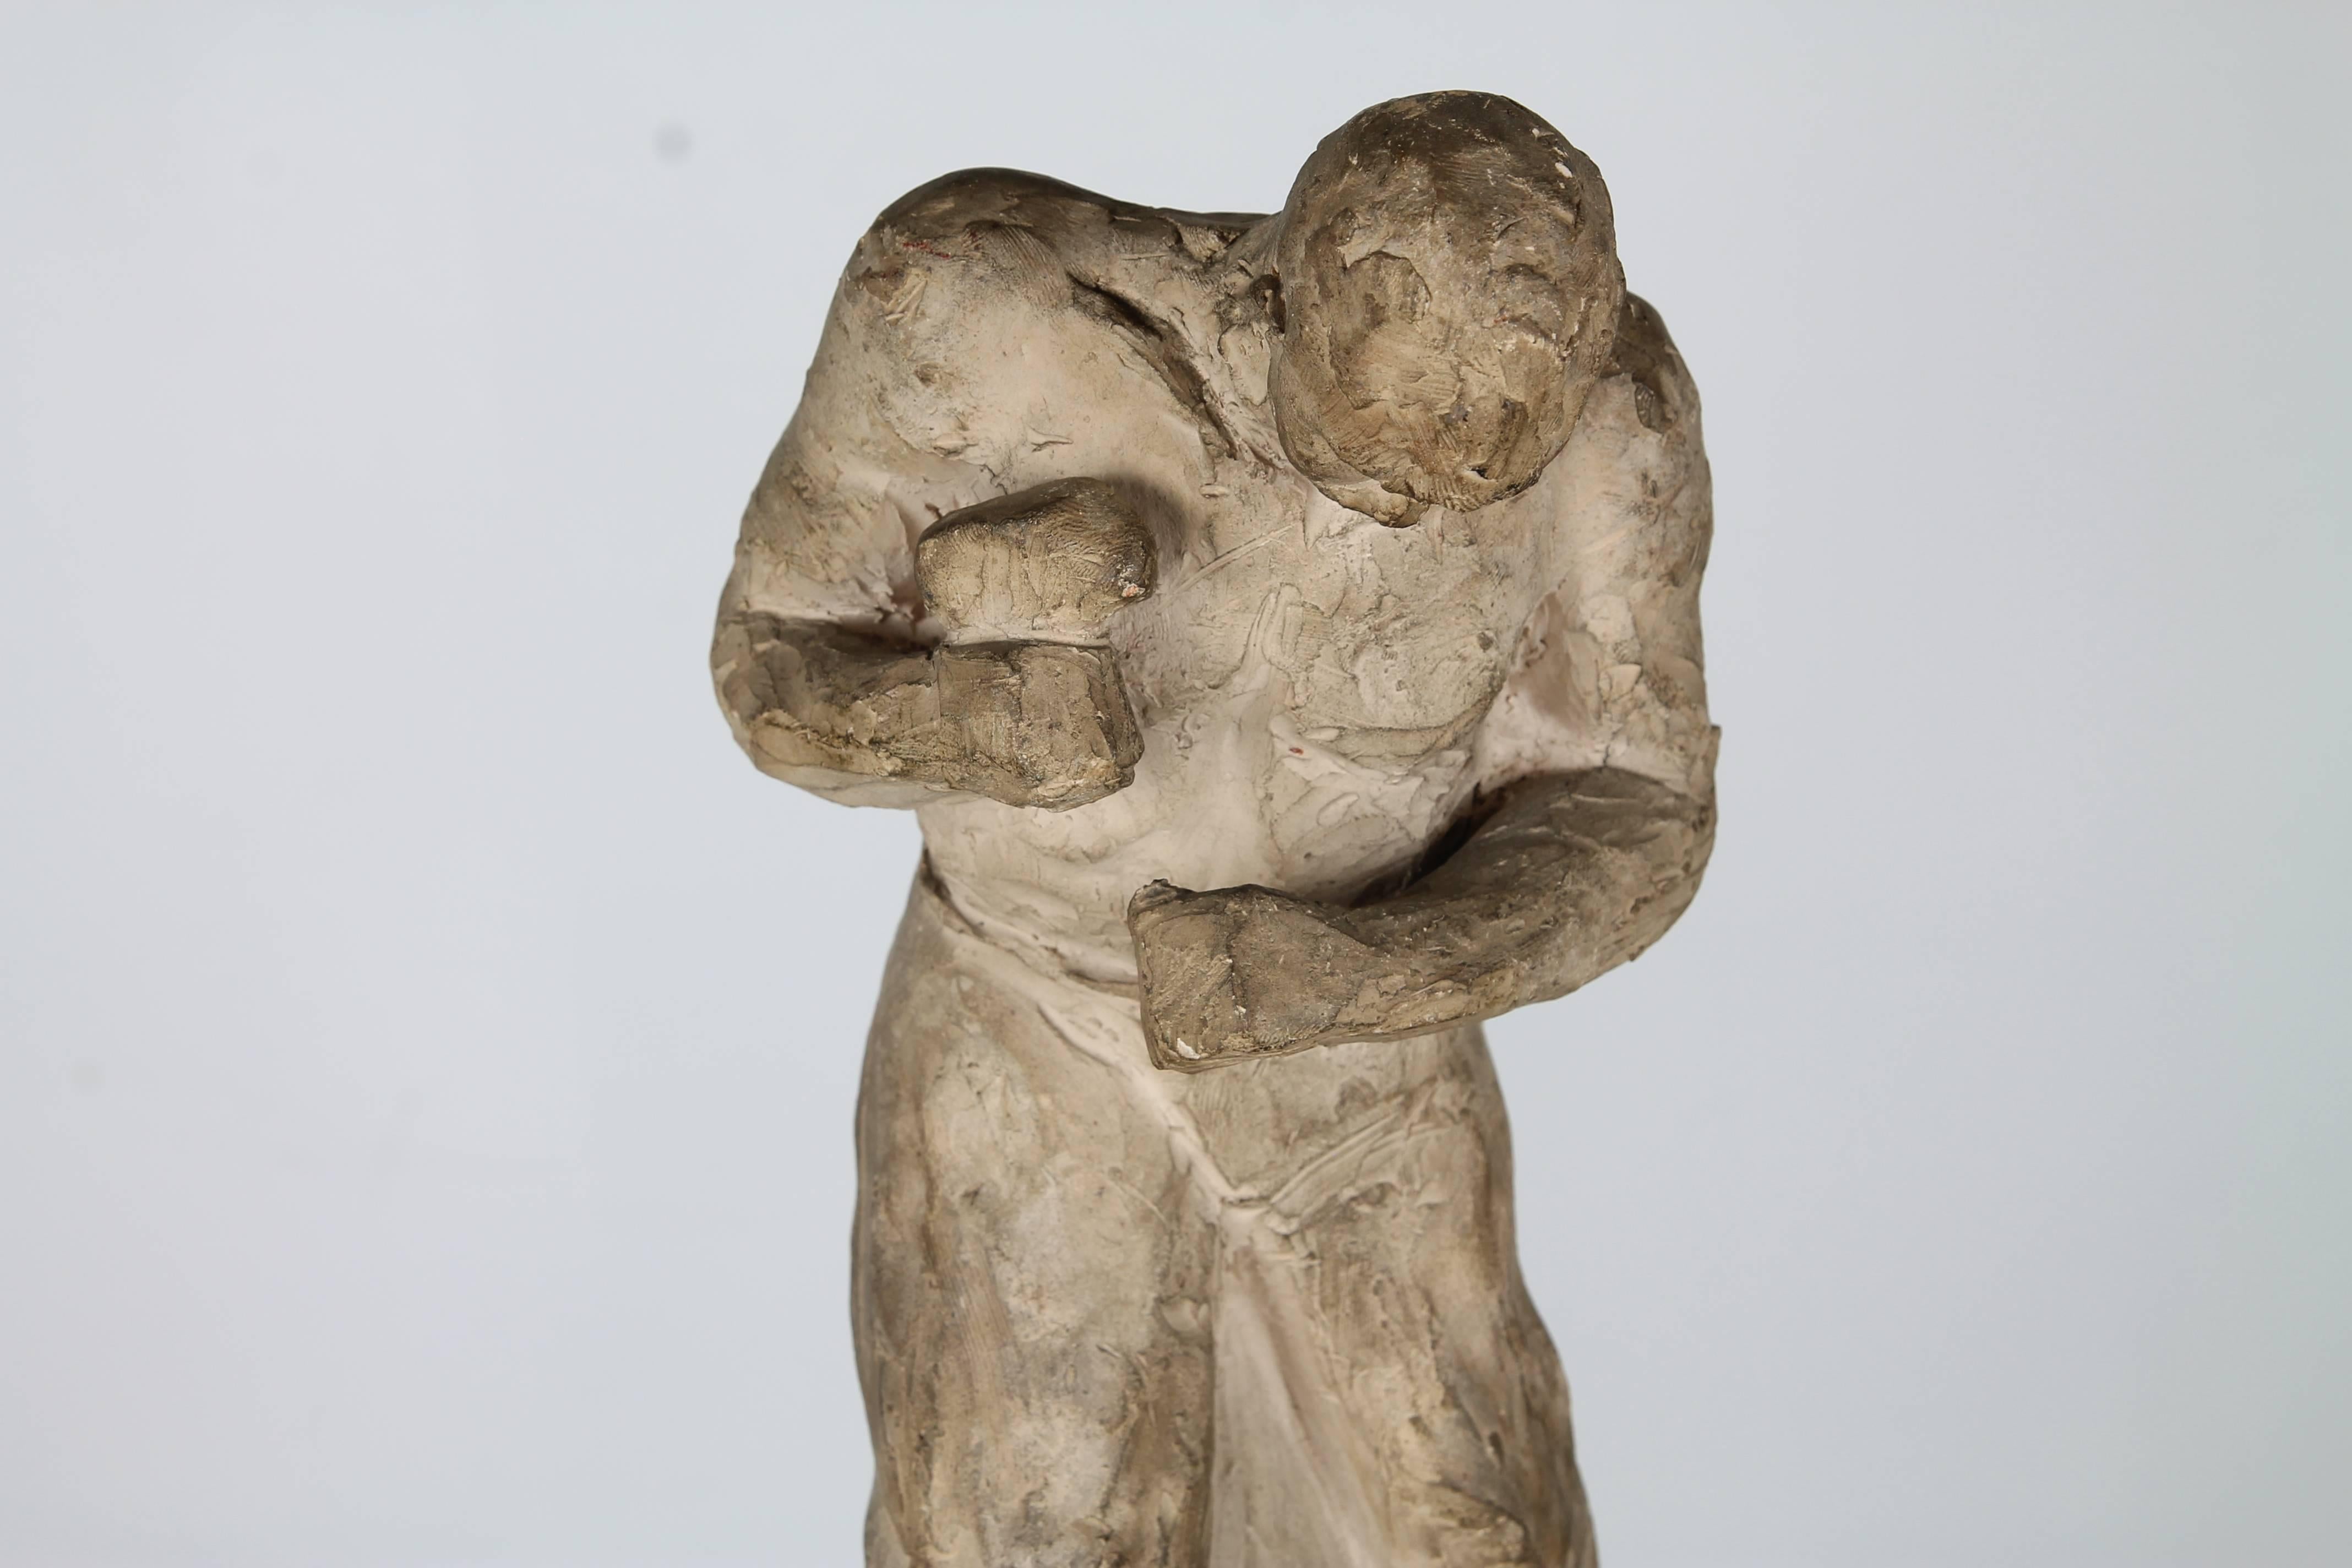 A prototype by Dutch sculptor Wessel Couzyn in plaster depicting a blacksmith with hammer. Signed at base.

Couzyn attended the Dutch Royal Academy of Plastic Arts in the late 1930s and was awarded the Prix de Rome in that time to study in Italy.